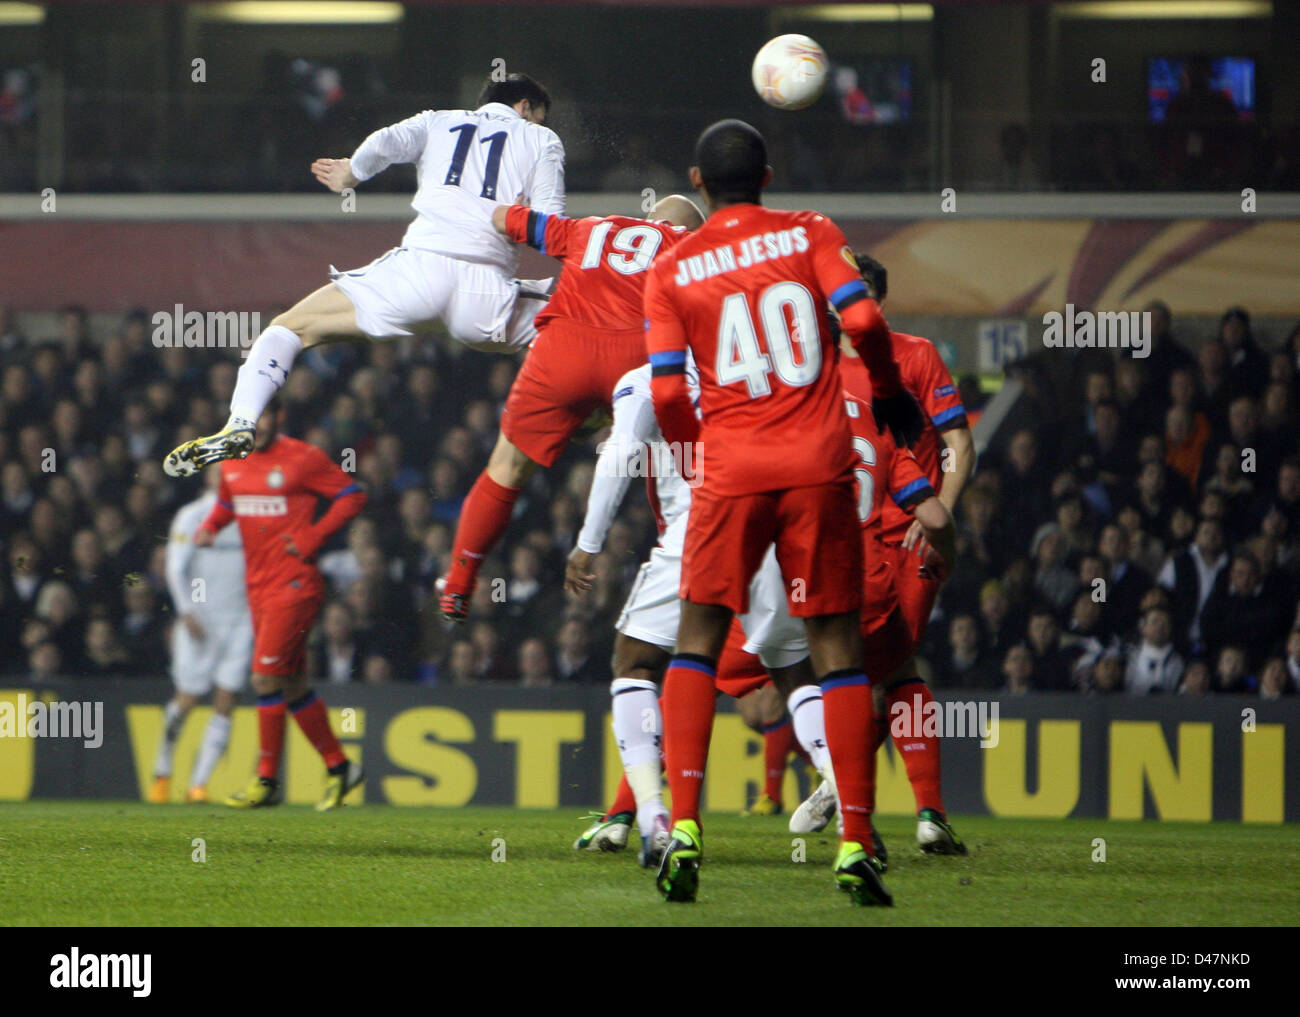 07.03.2013 London, England. Gareth Bale of Tottenham Hotspur scores the first goal with this headerin the 6th minute during the Europa League game between Tottenham Hotspur and Inter Milan from White Hart Lane. Stock Photo